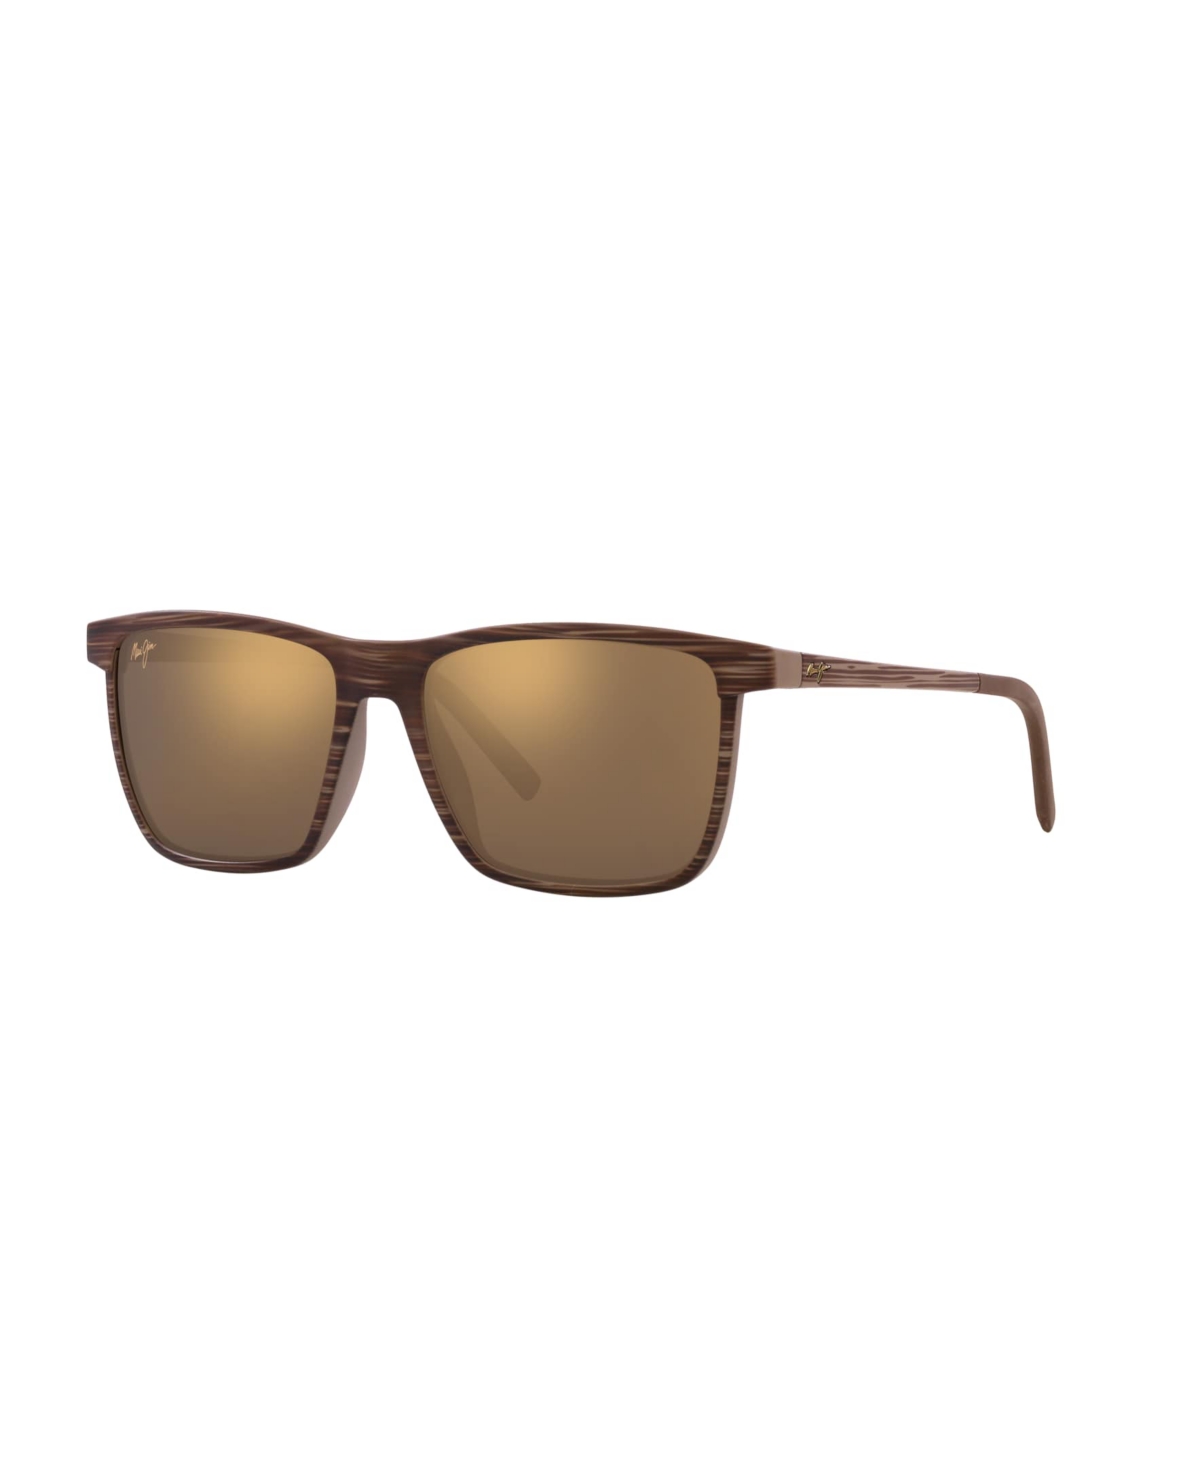 Shop Maui Jim Unisex Polarized Sunglasses, One Way In Brown